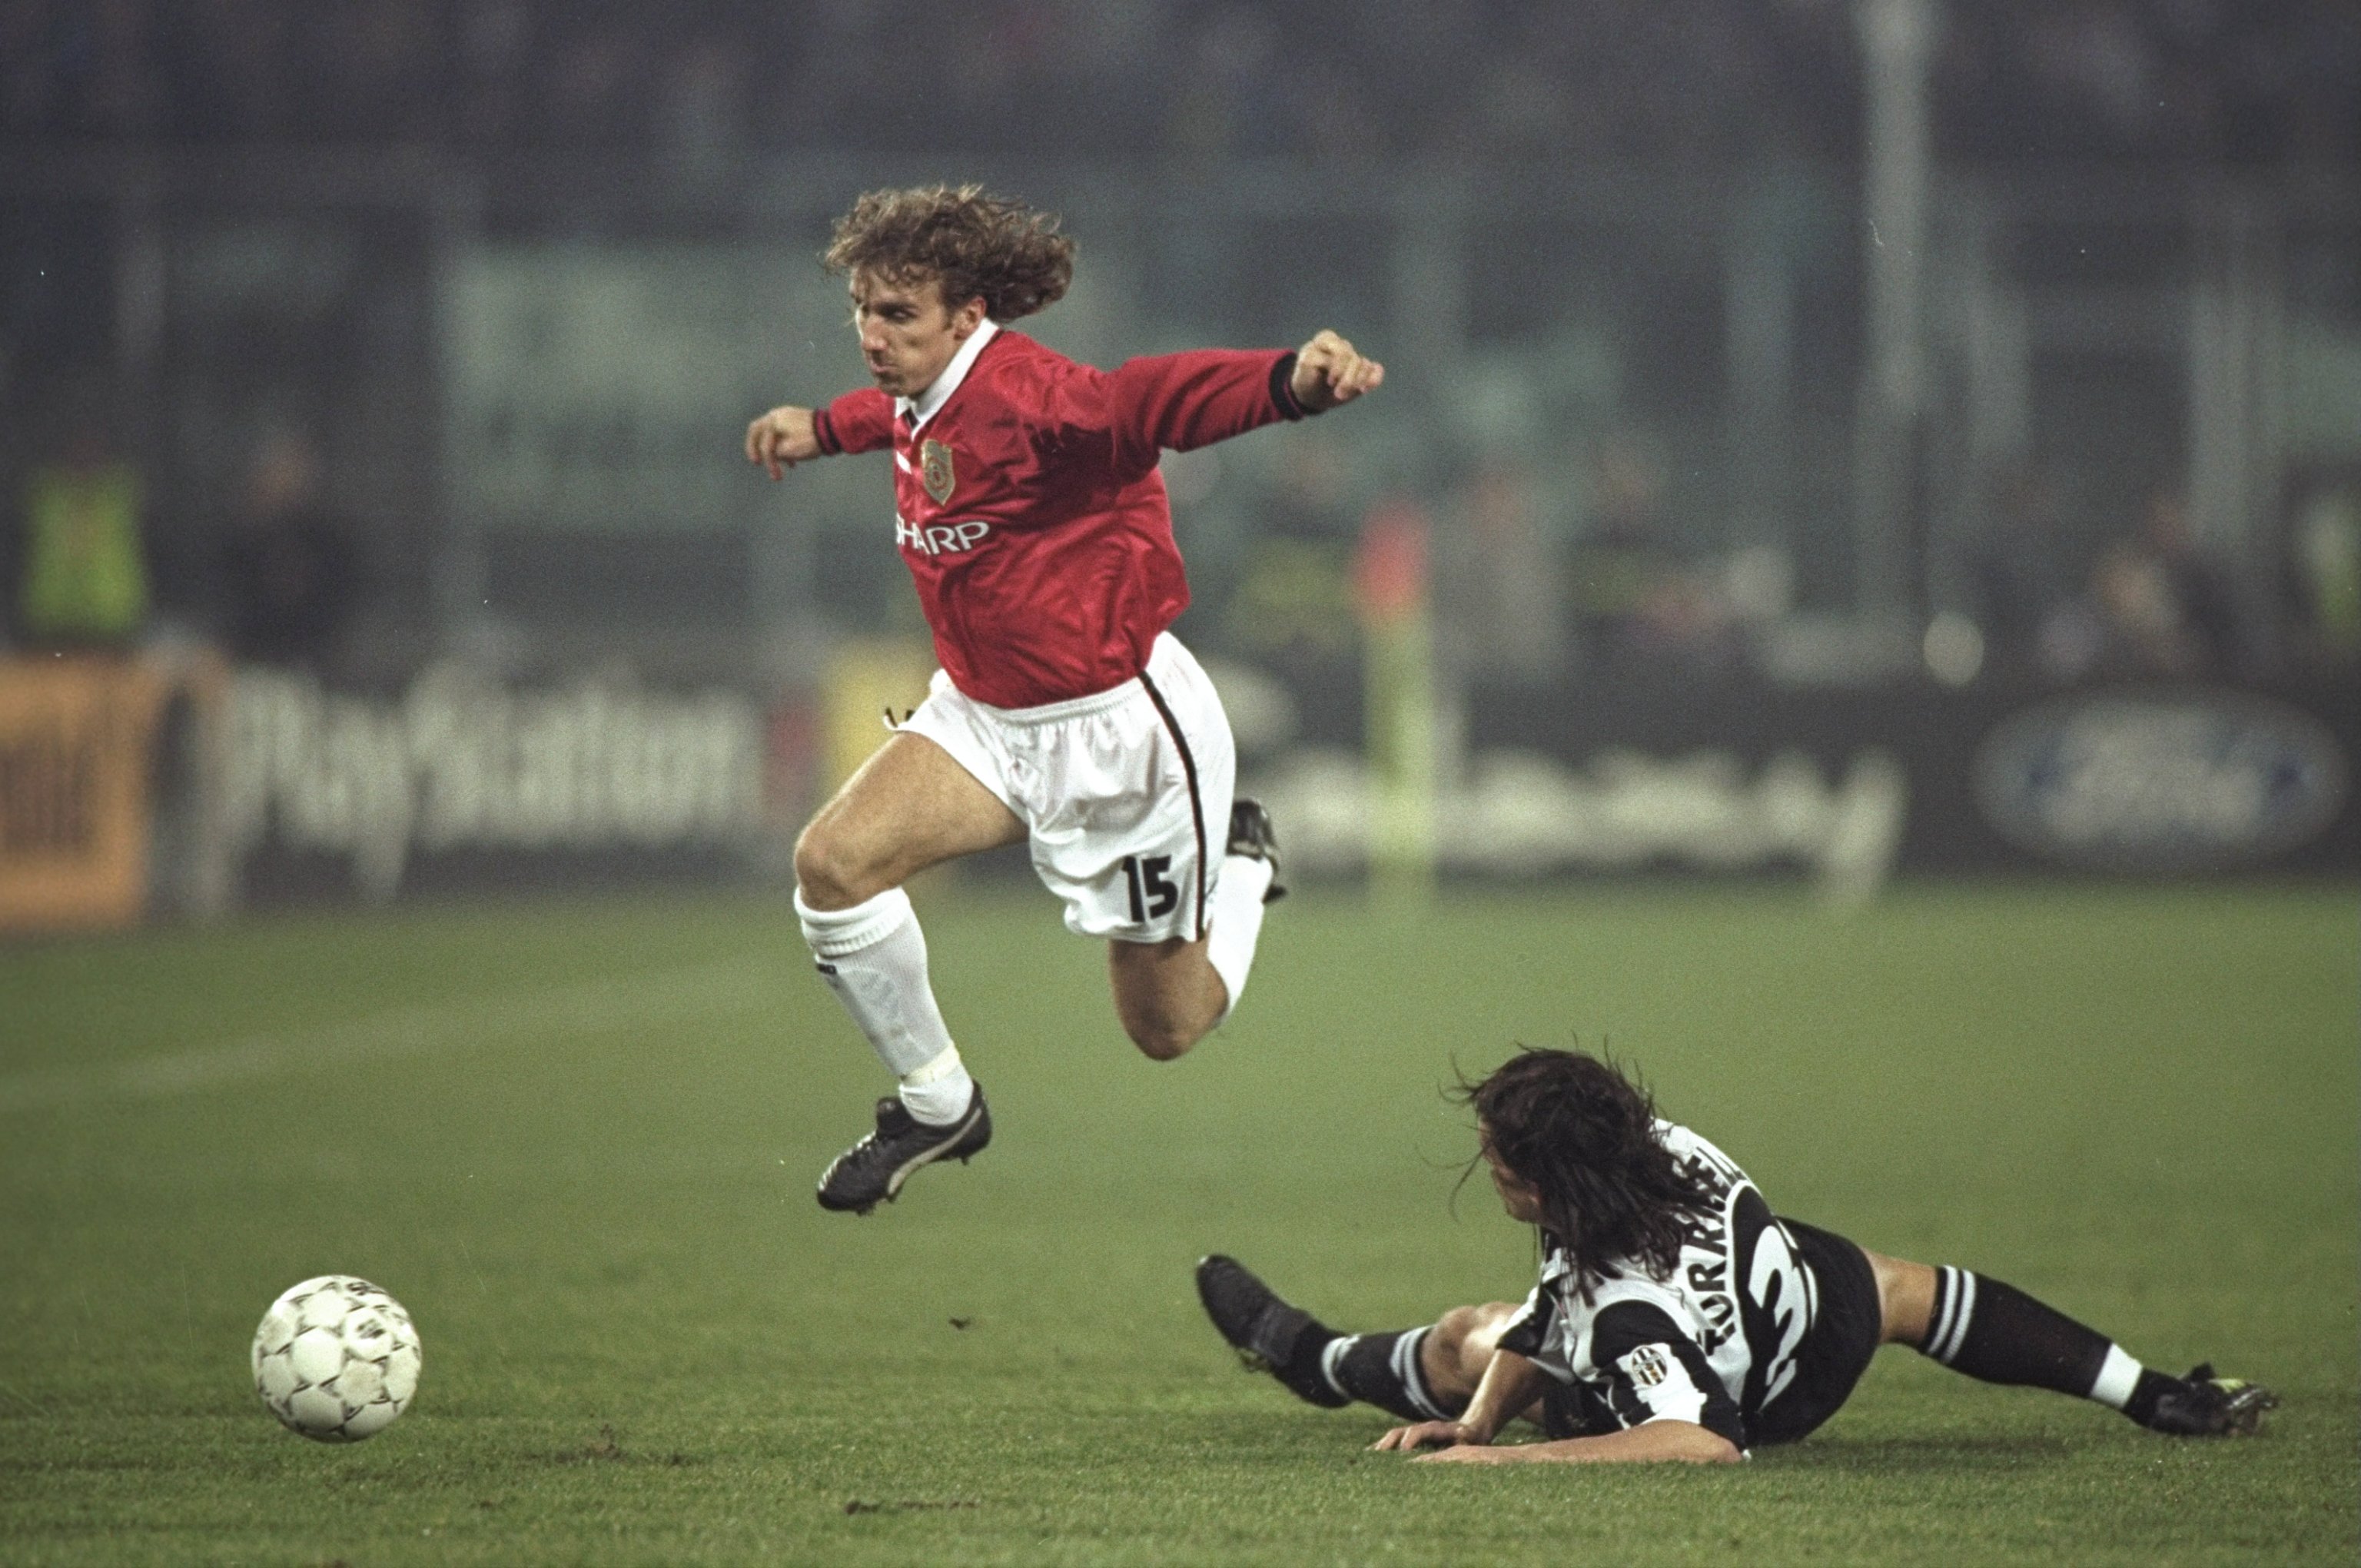 10 Dec 1997:  Karel Poborsky of Manchester United skips over the challenge of Moreno Torricelli of Juventus during the UEFA Champions League match at the Stadio Delle Alpi in Turin, Italy. Juventus won 1-0 to qualify for the quarter-finals. \ Mandatory Cr